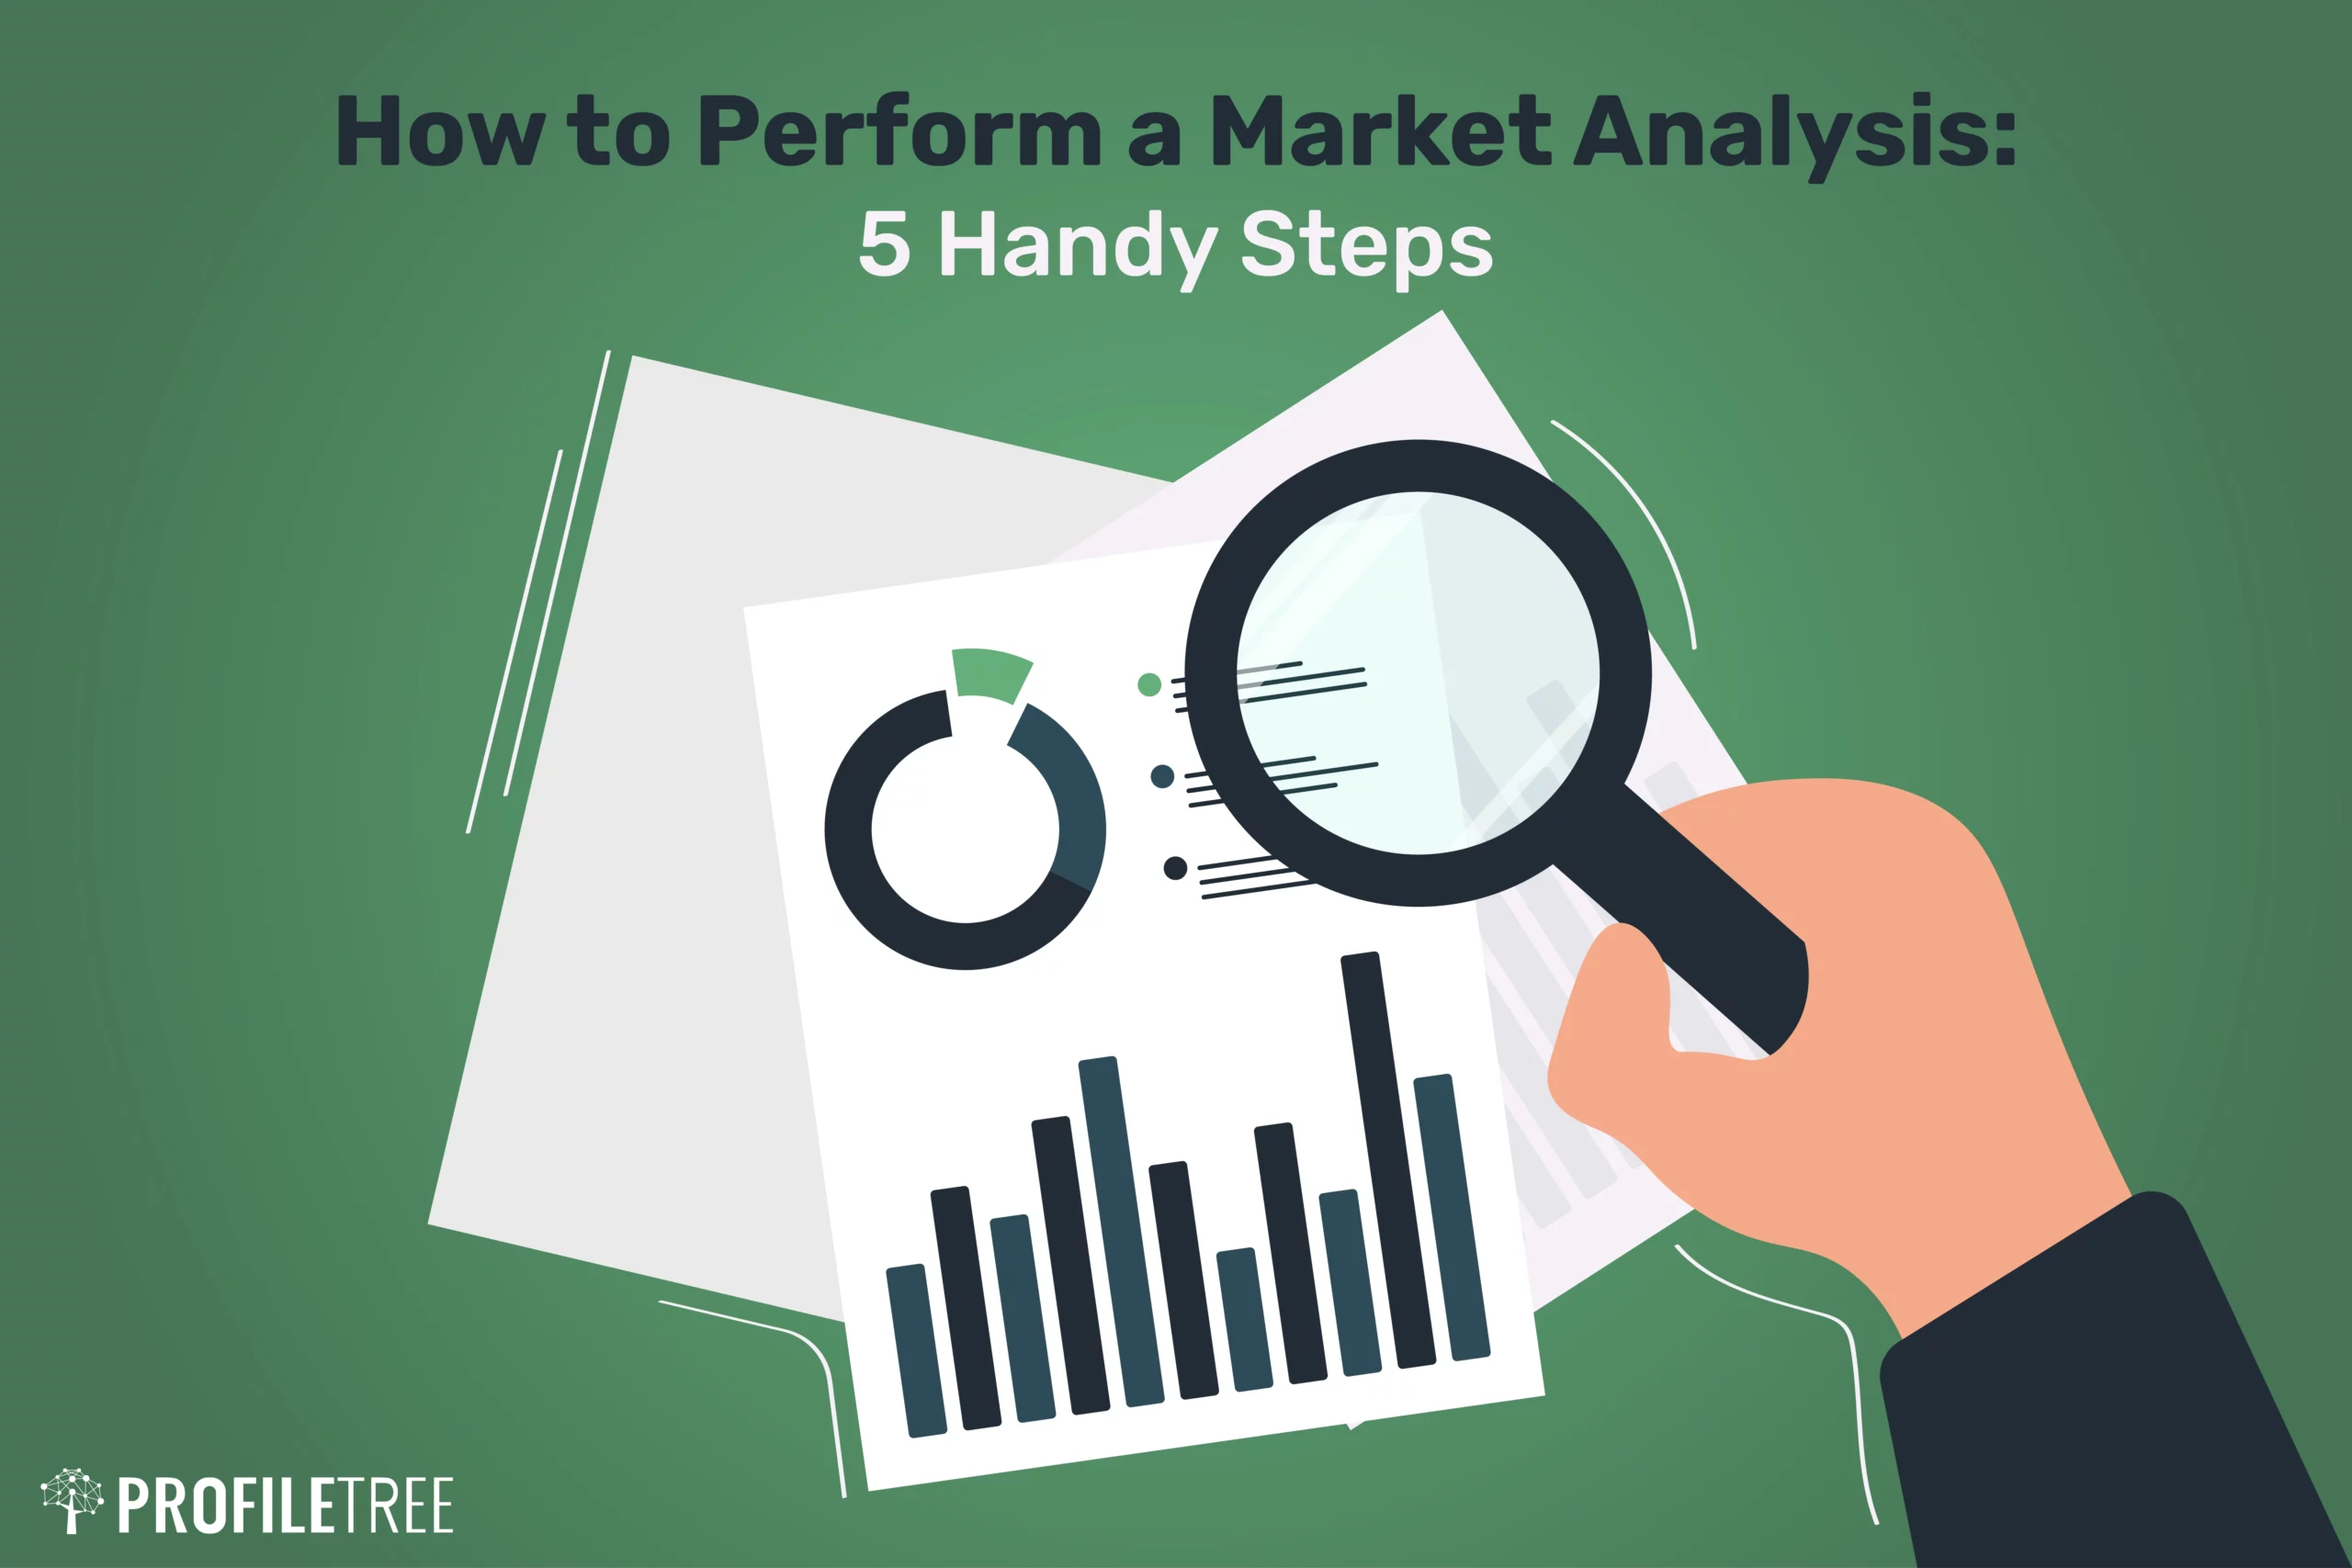 How to Perform a Market Analysis 5 Handy Steps